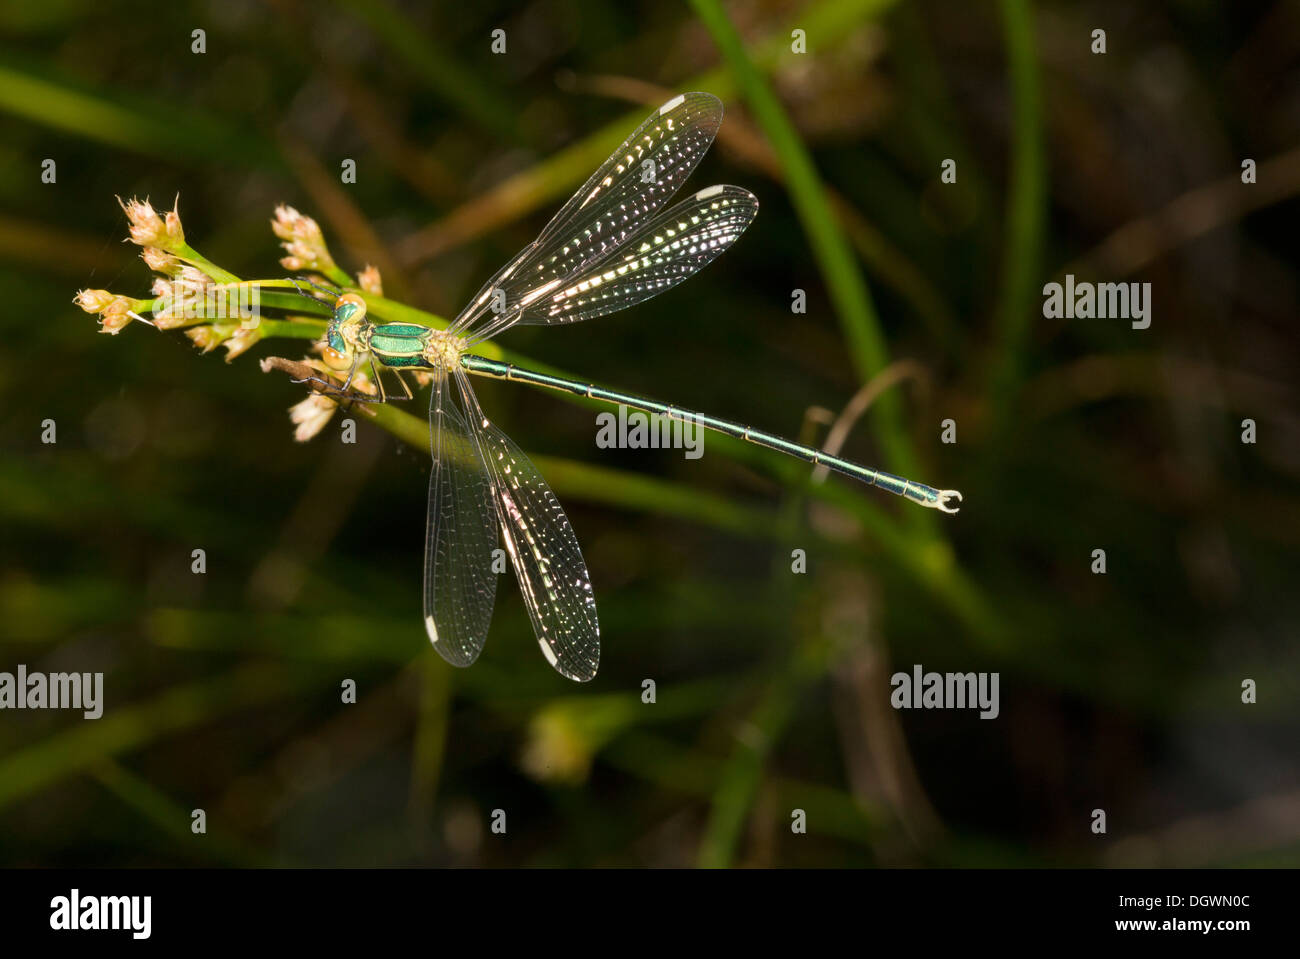 Male Western Willow Spreadwing / Willow Emerald Damselfly, Lestes viridis. Cherbourg. Stock Photo